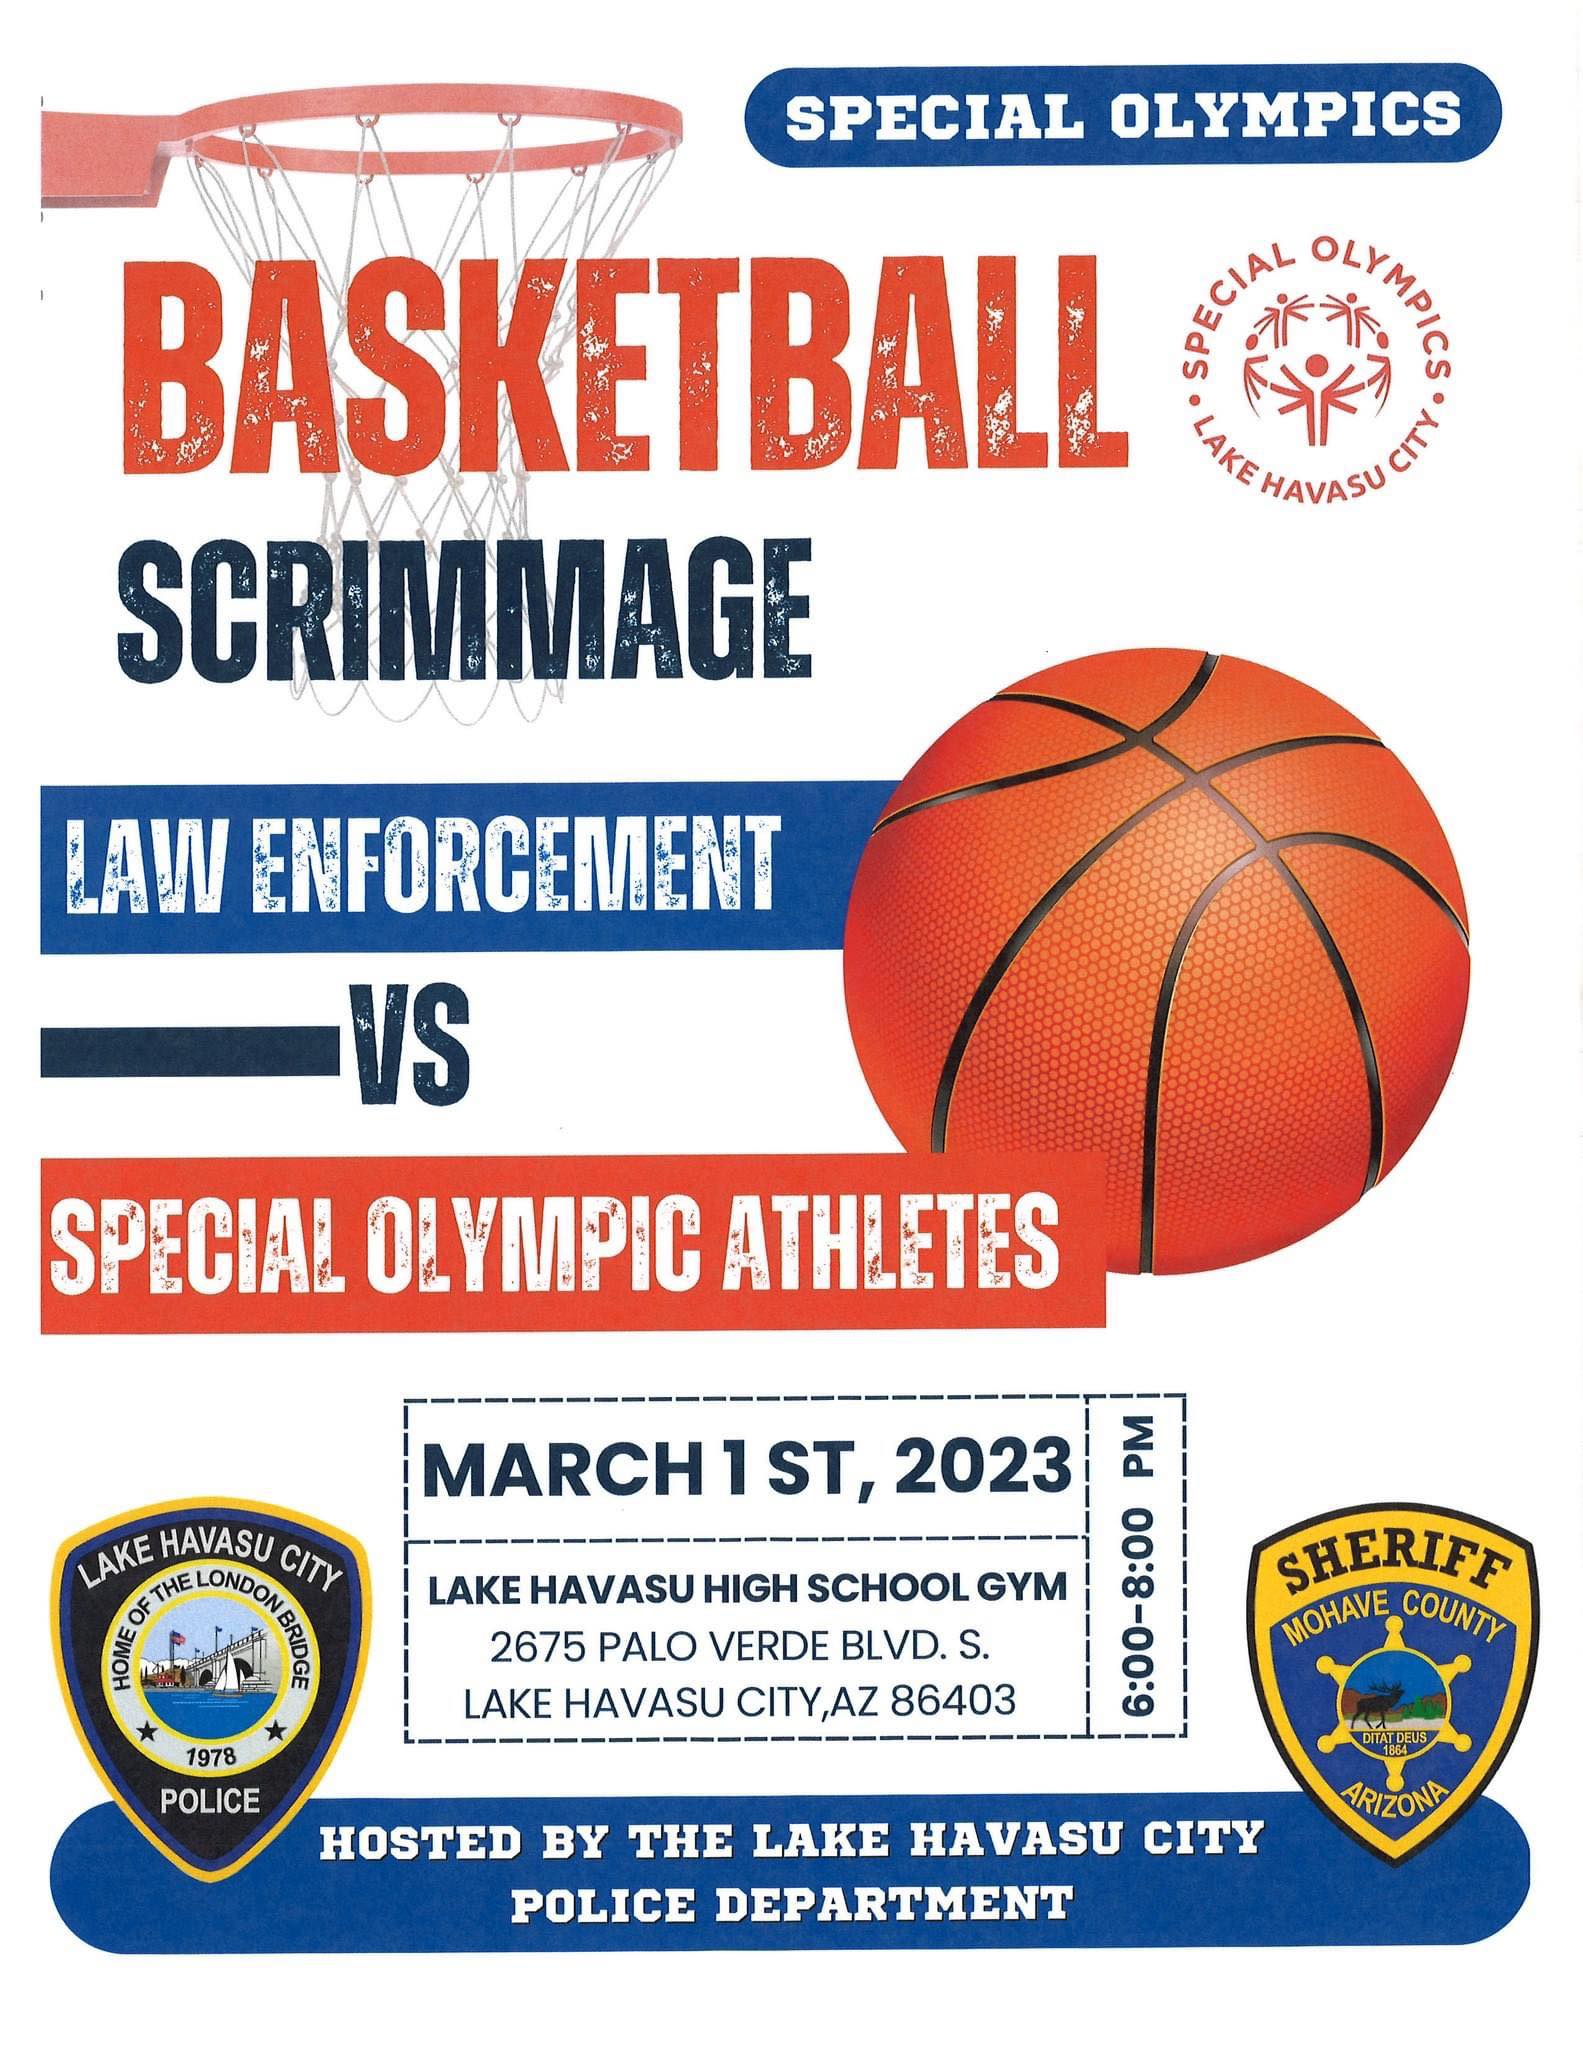 Special Olympics Basketball Scrimmage